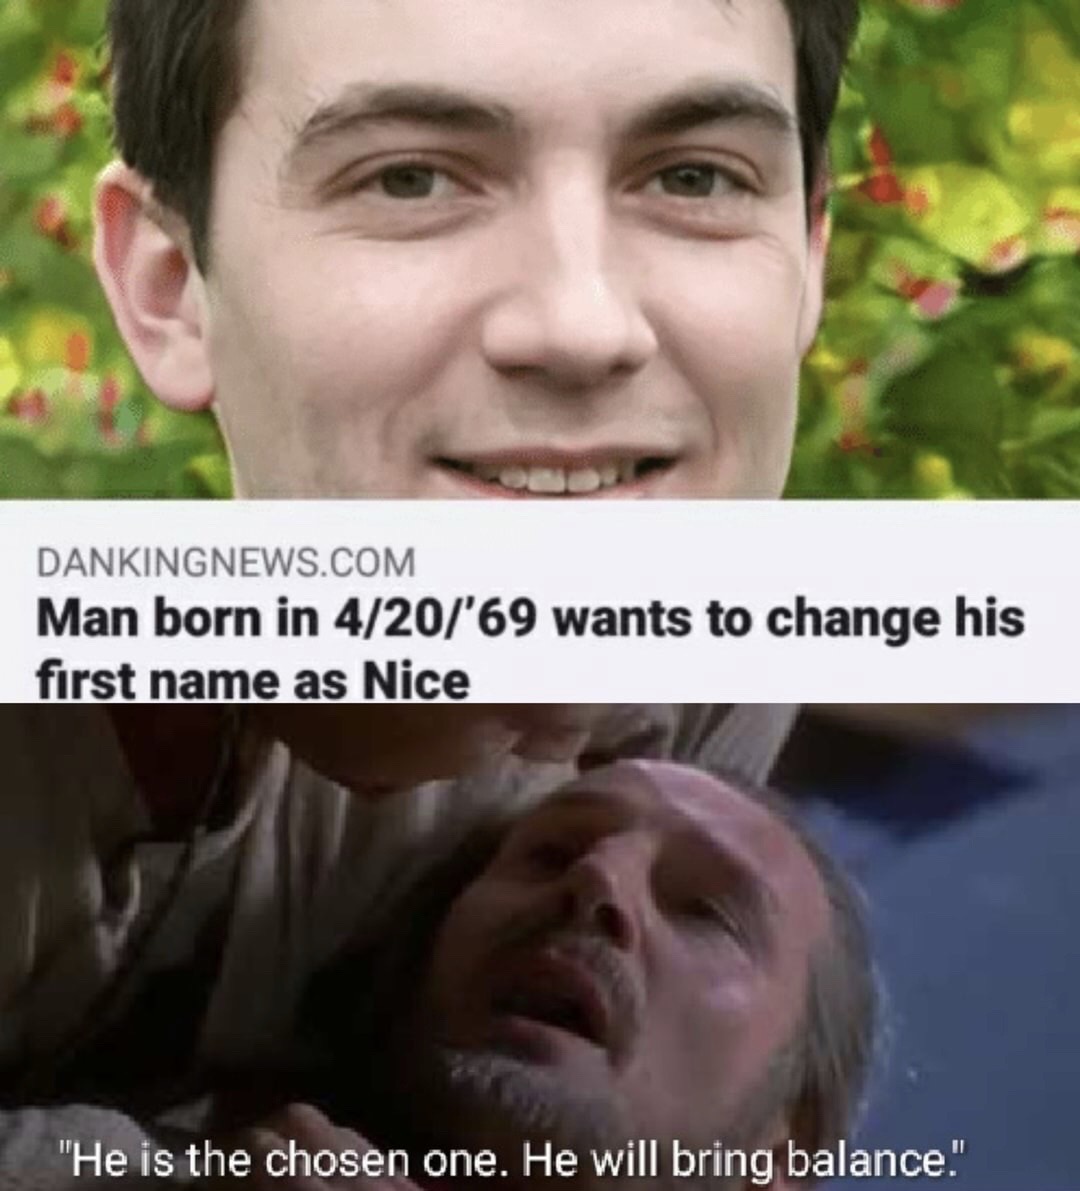 man born in 4 20 69 - Dankingnews.Com Man born in 420'69 wants to change his first name as Nice "He is the chosen one. He will bring balance."